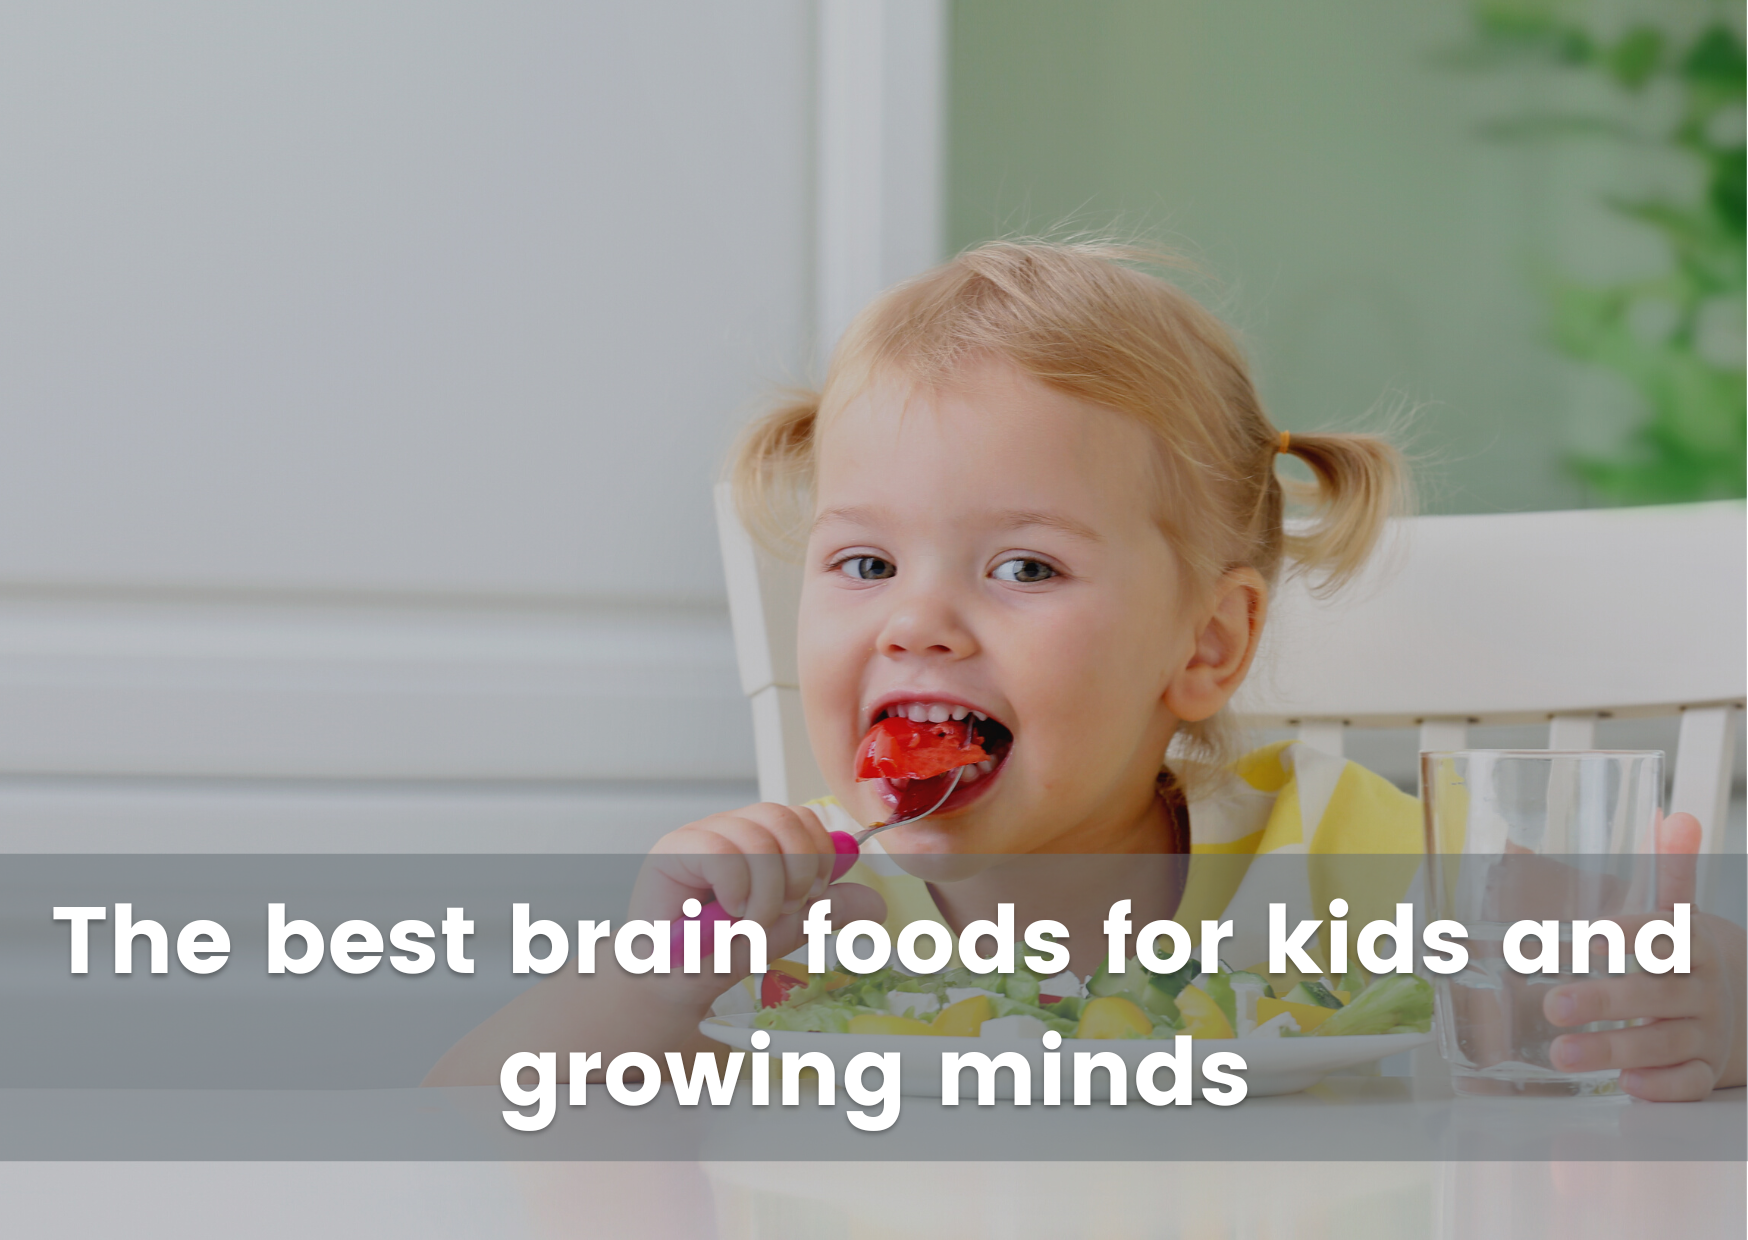 The best brain foods for kids and growing minds